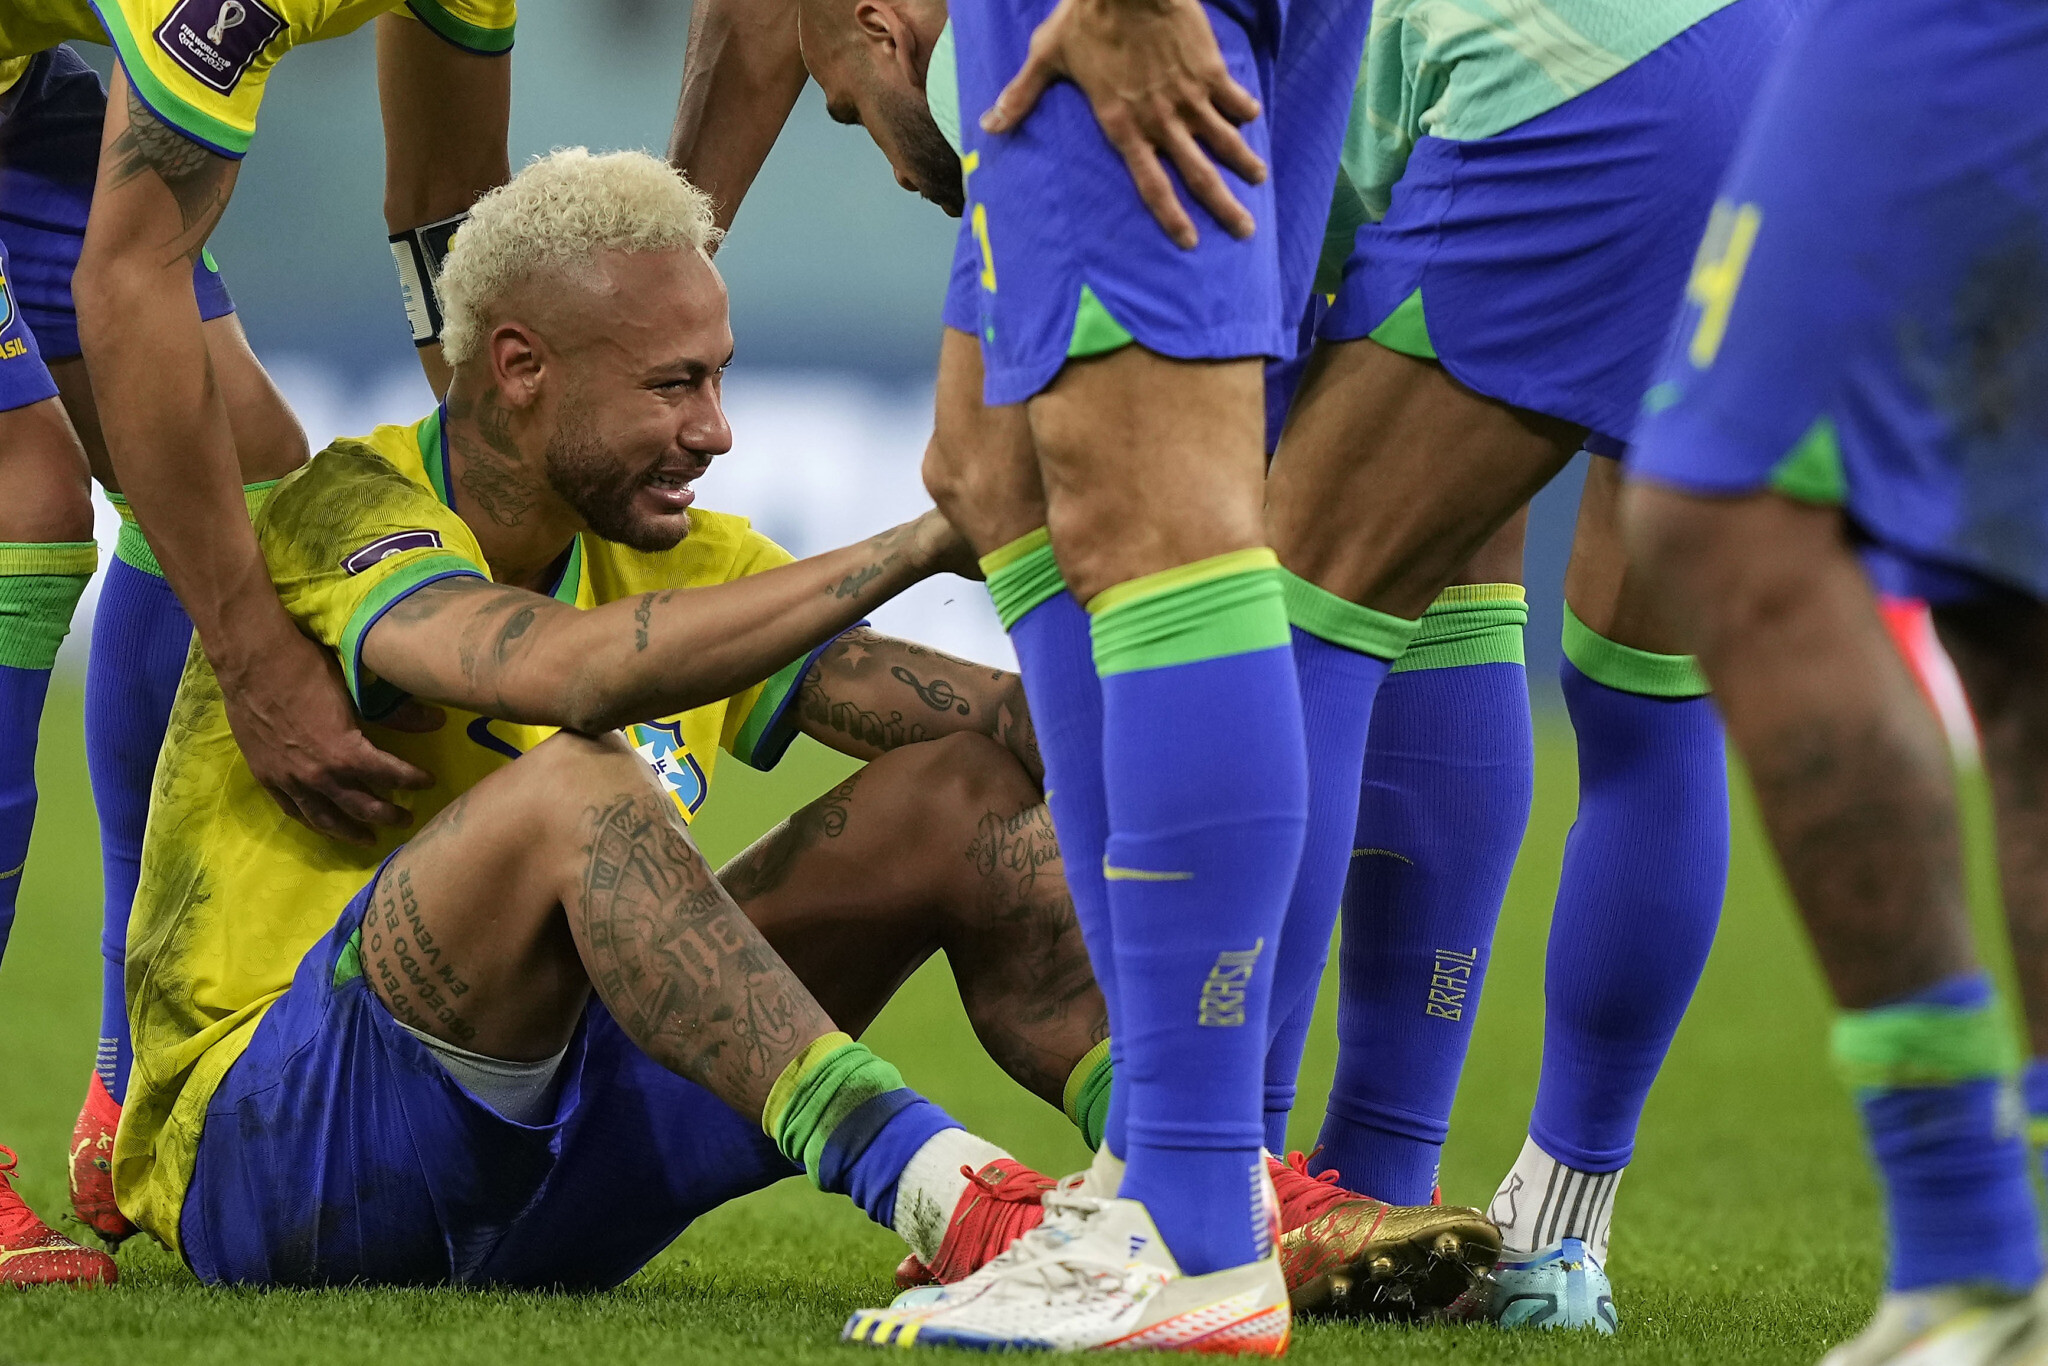 After Brazil's Shocking Defeat, Take A Close Look